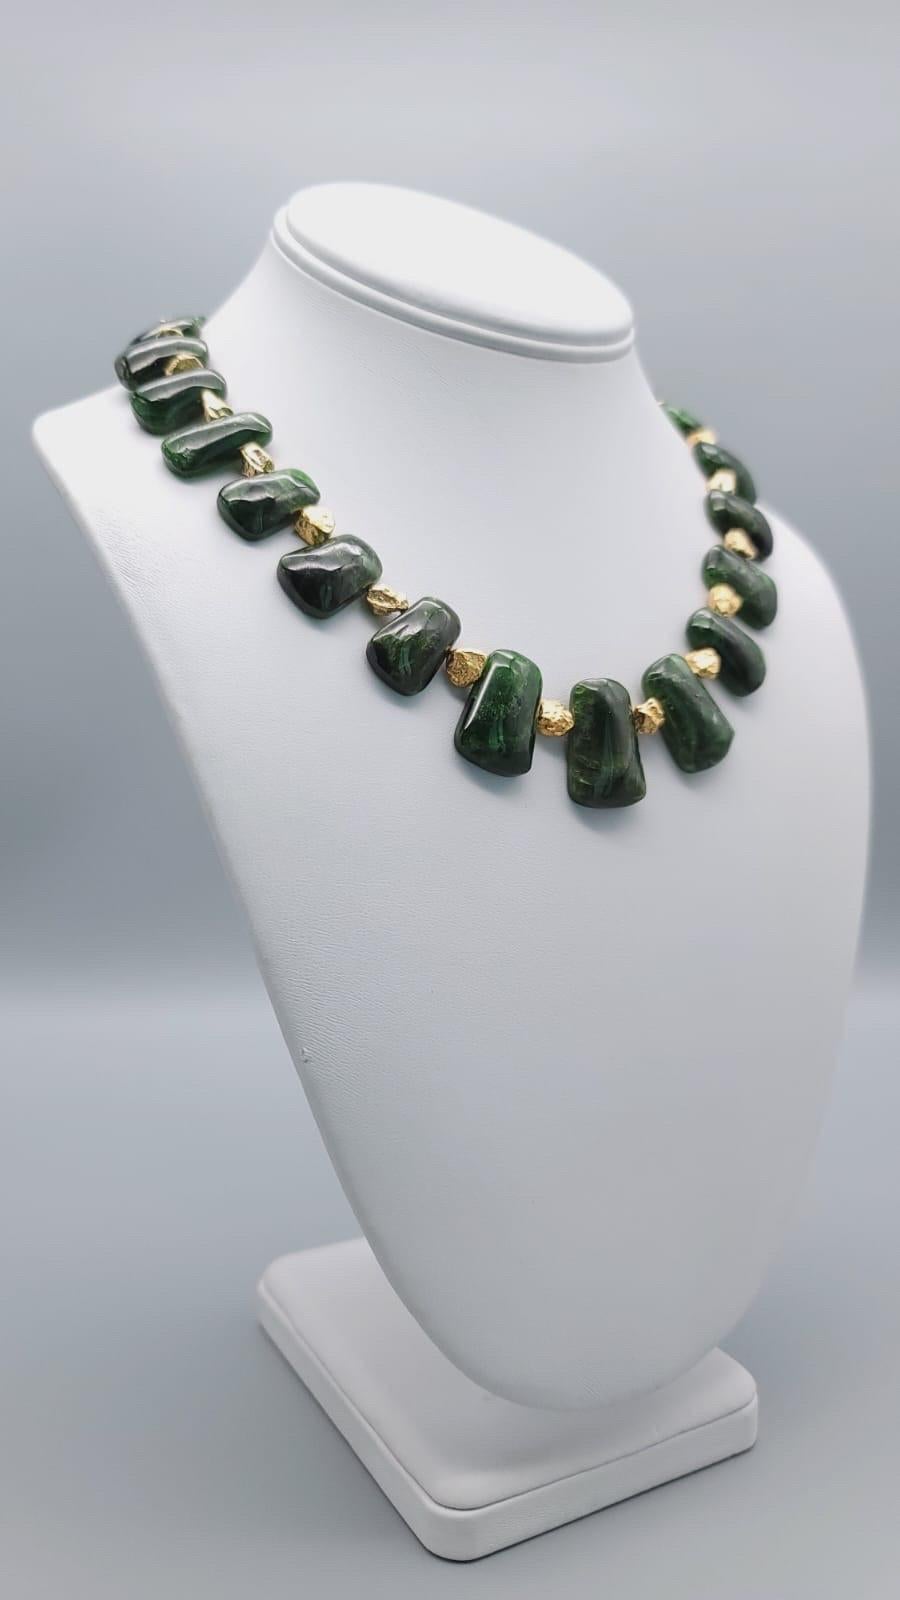 One-of-a-Kind

Richly colored Chrome Diopside is a relatively new stone, only discovered in 1988, that deserves notice. Visually, often mistaken for emeralds because of their lovely green color. The biggest difference is that Chrome Diopside is